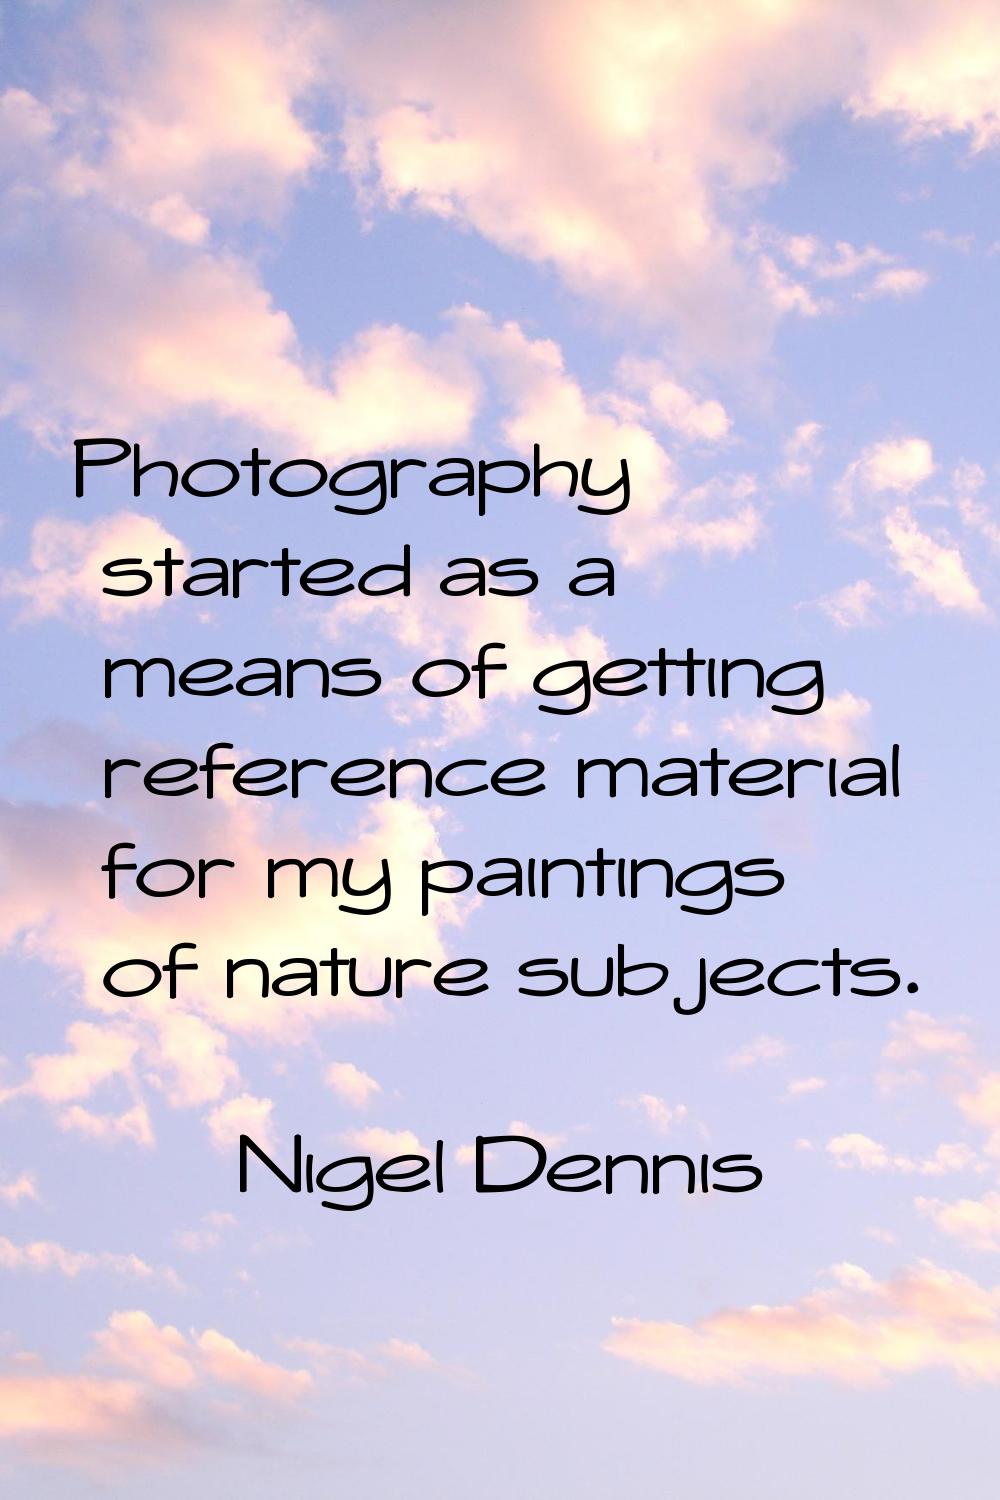 Photography started as a means of getting reference material for my paintings of nature subjects.